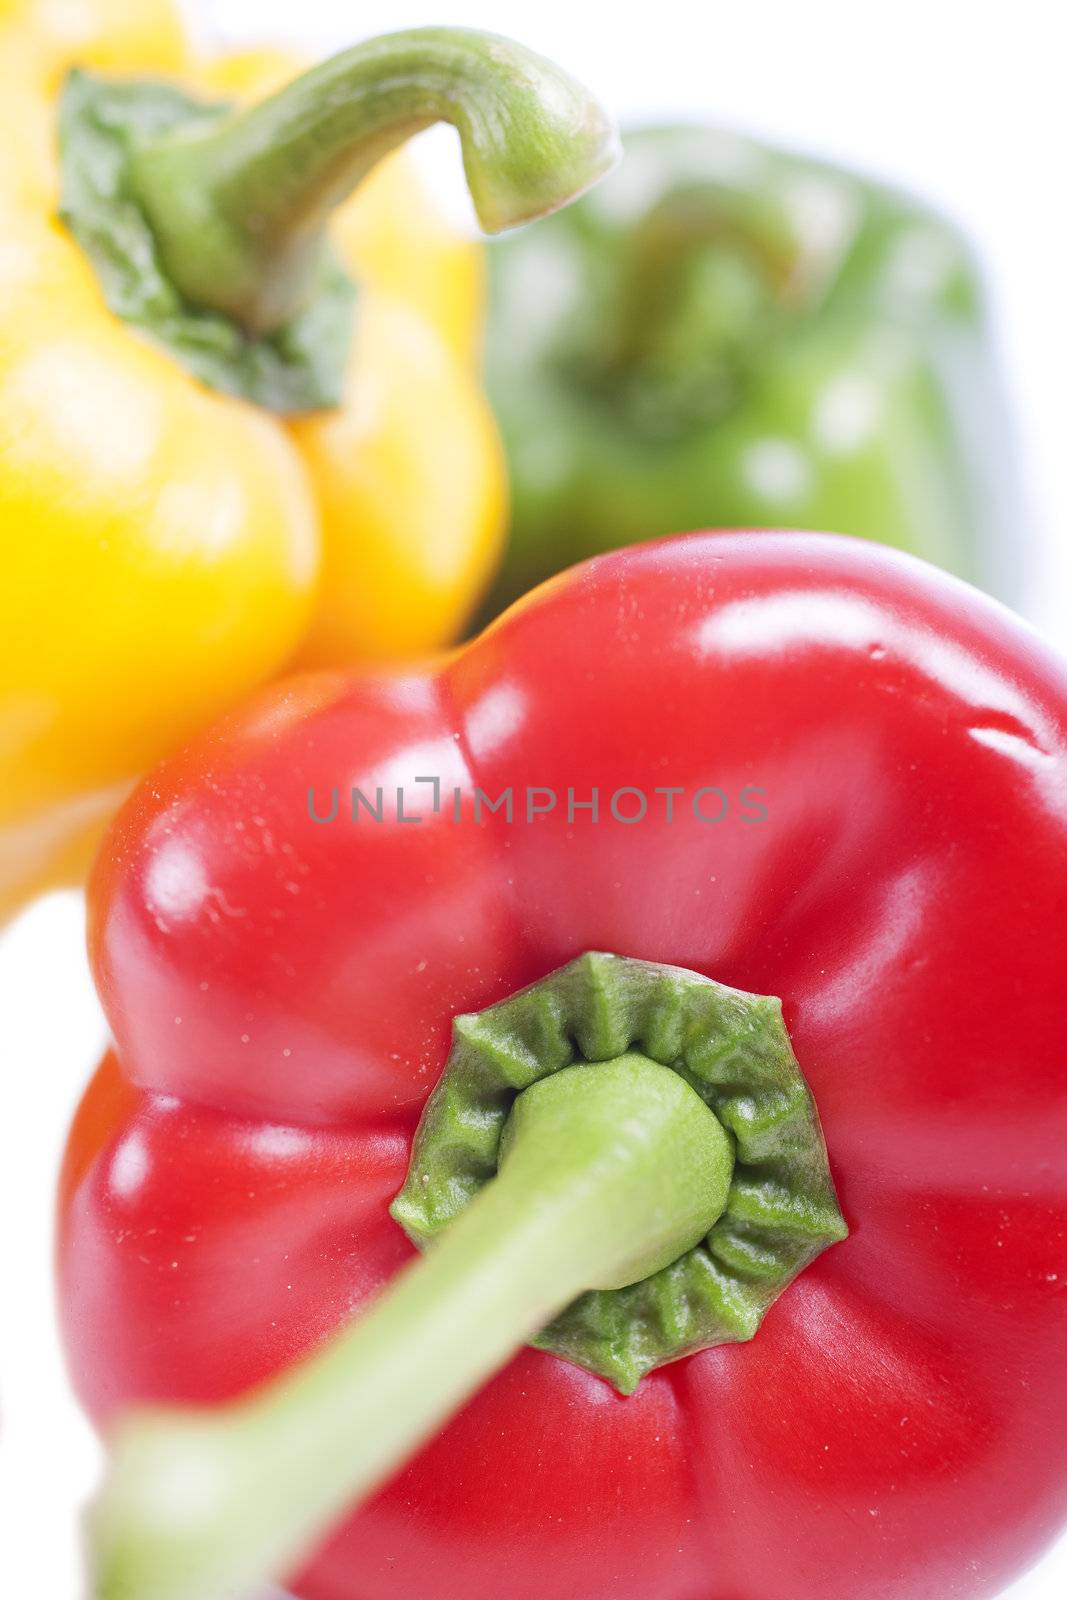 Selection of red yellow green peppers by studiofi